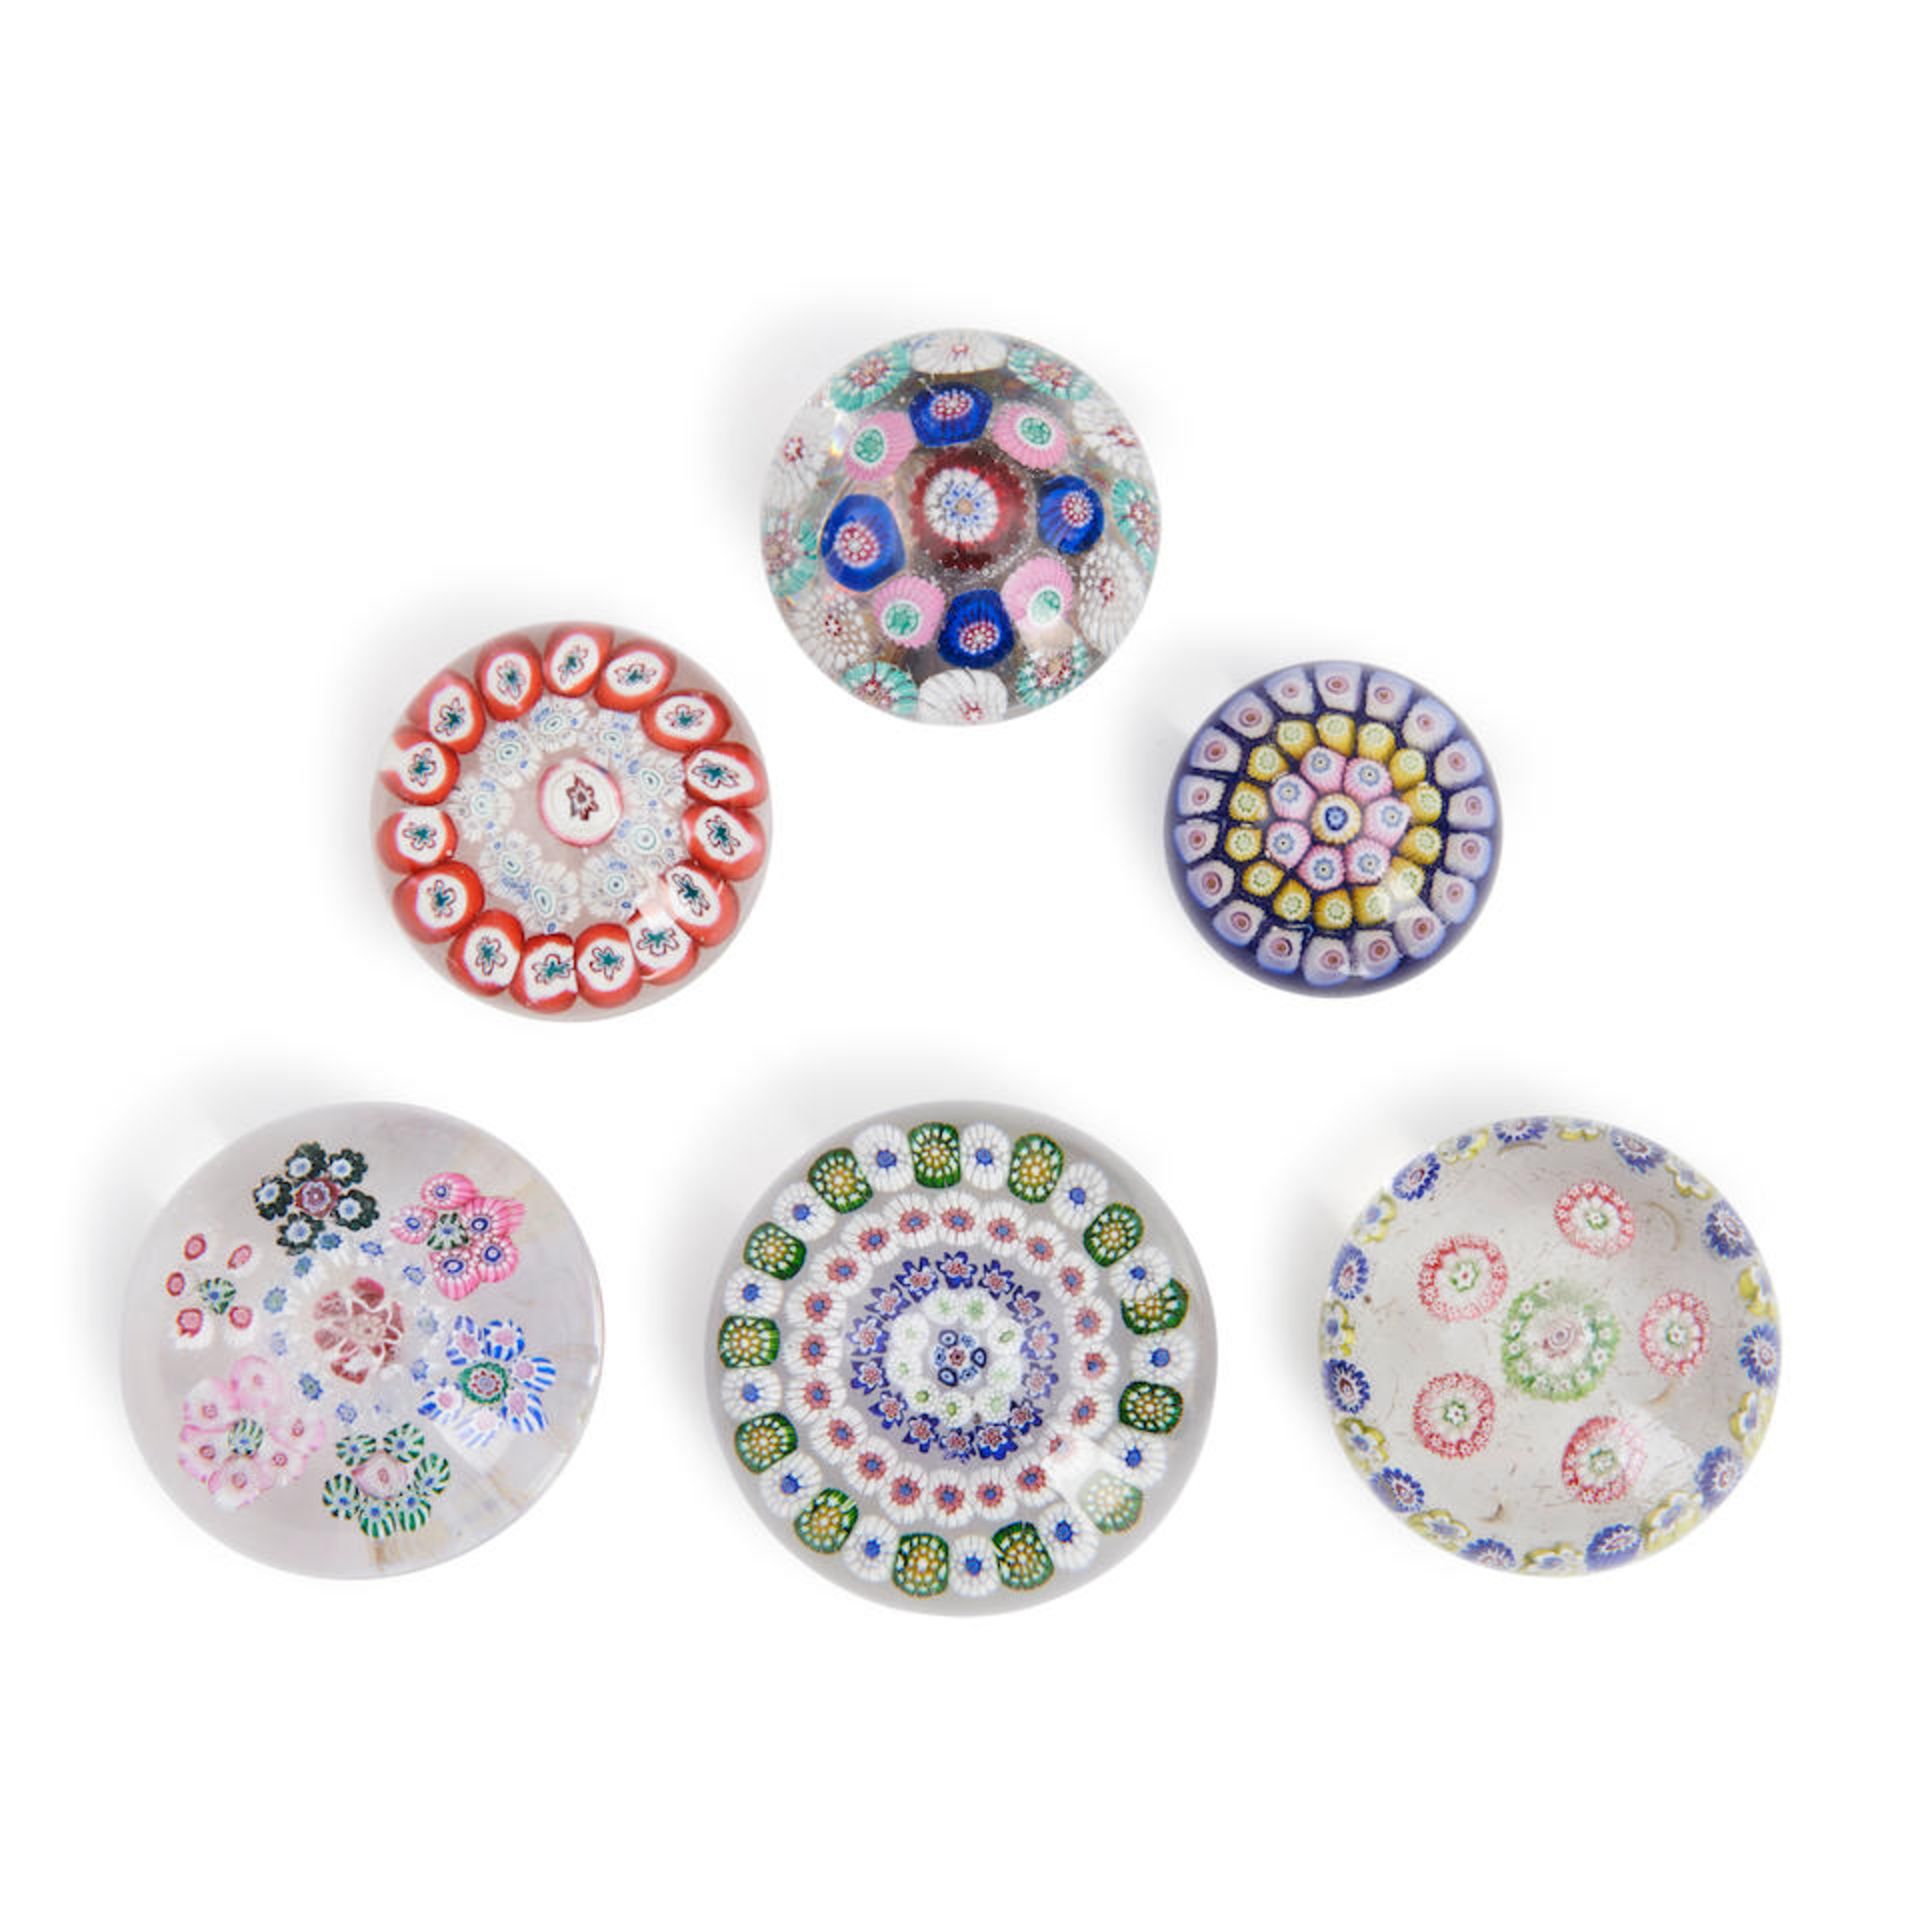 SIX SMALL MILLEFIORI GLASS PAPERWEIGHTS, including a metal based stopper, ht. 1/2 to 2 in.